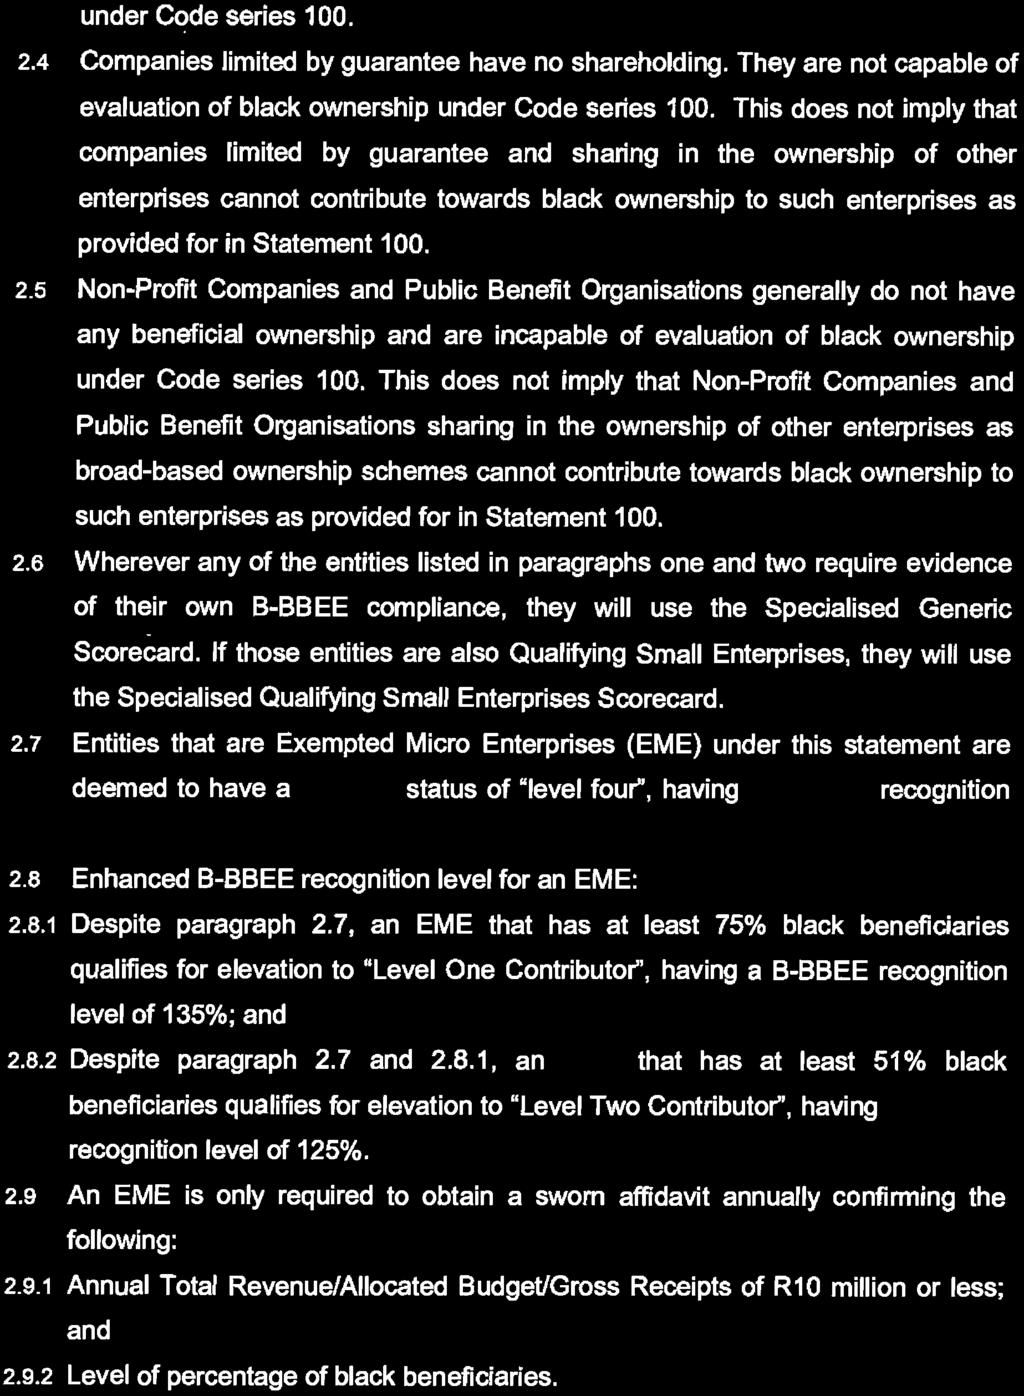 20 No. 39726 GOVERNMENT GAZETTE, 24 FEBRUARY 2016 under Code series 100. 2.4 Companies limited by guarantee have no shareholding.